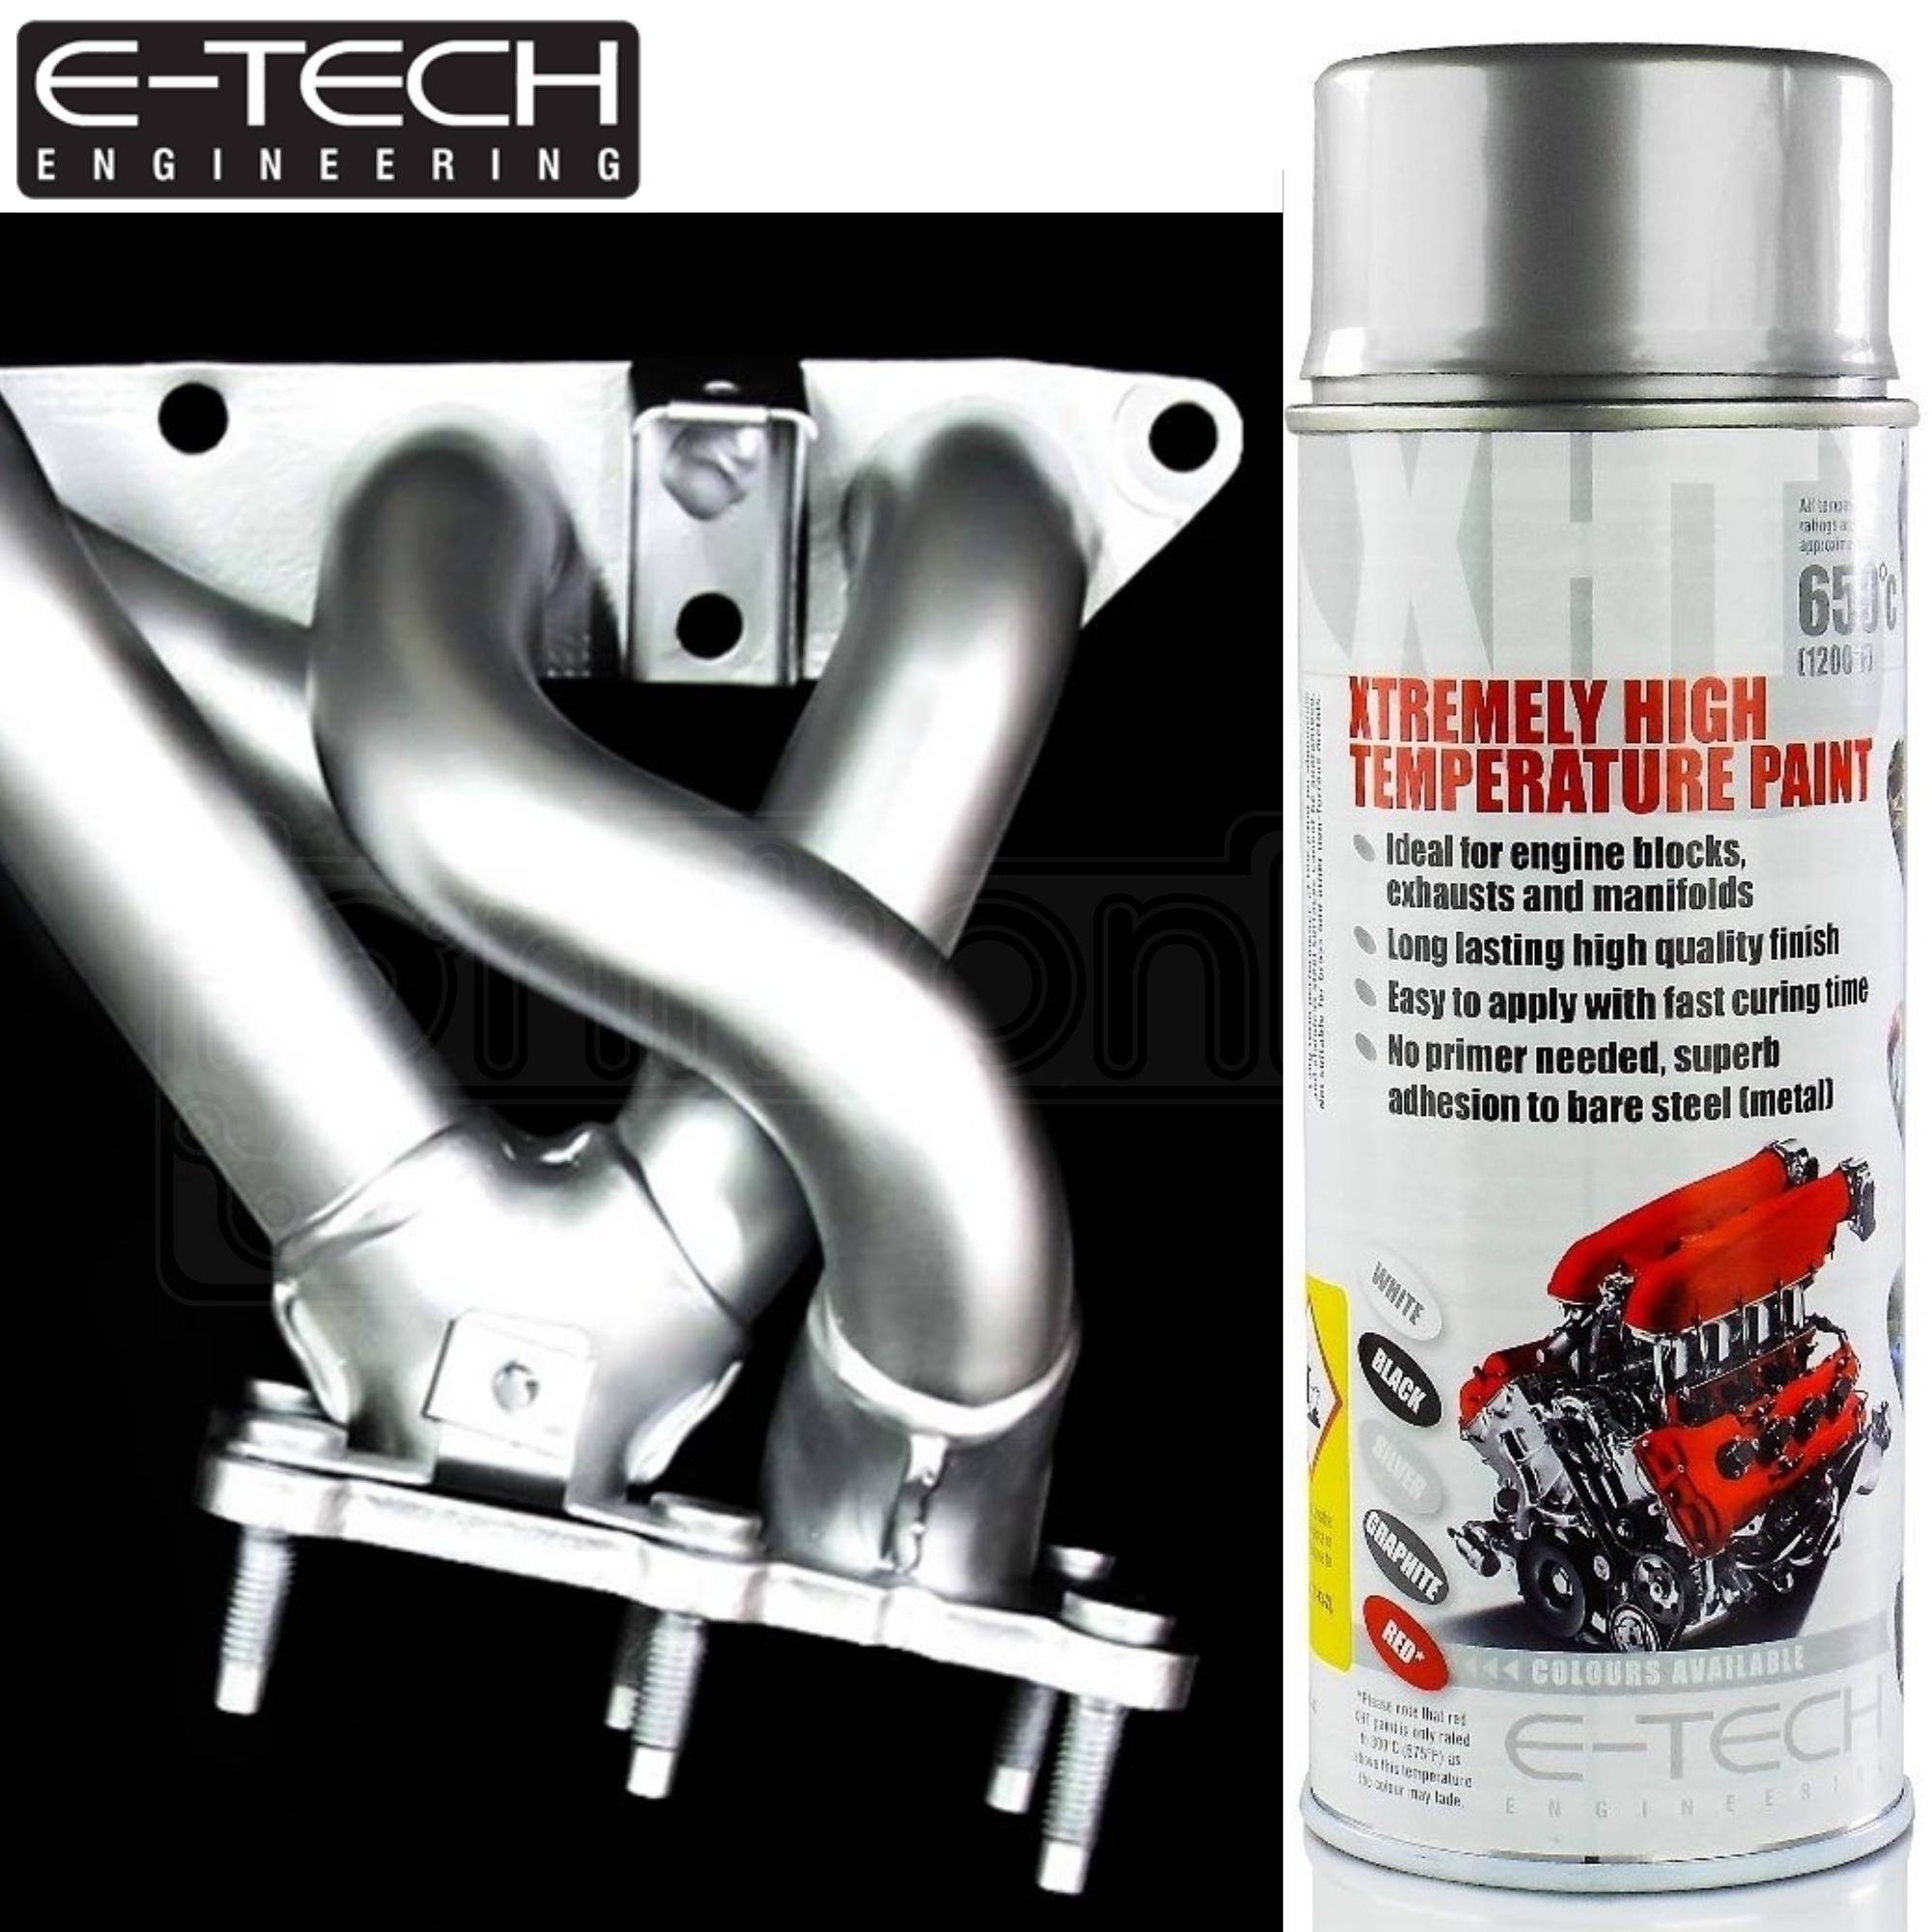 E-Tech Xht Xtremely High Temperature Paint - Silver